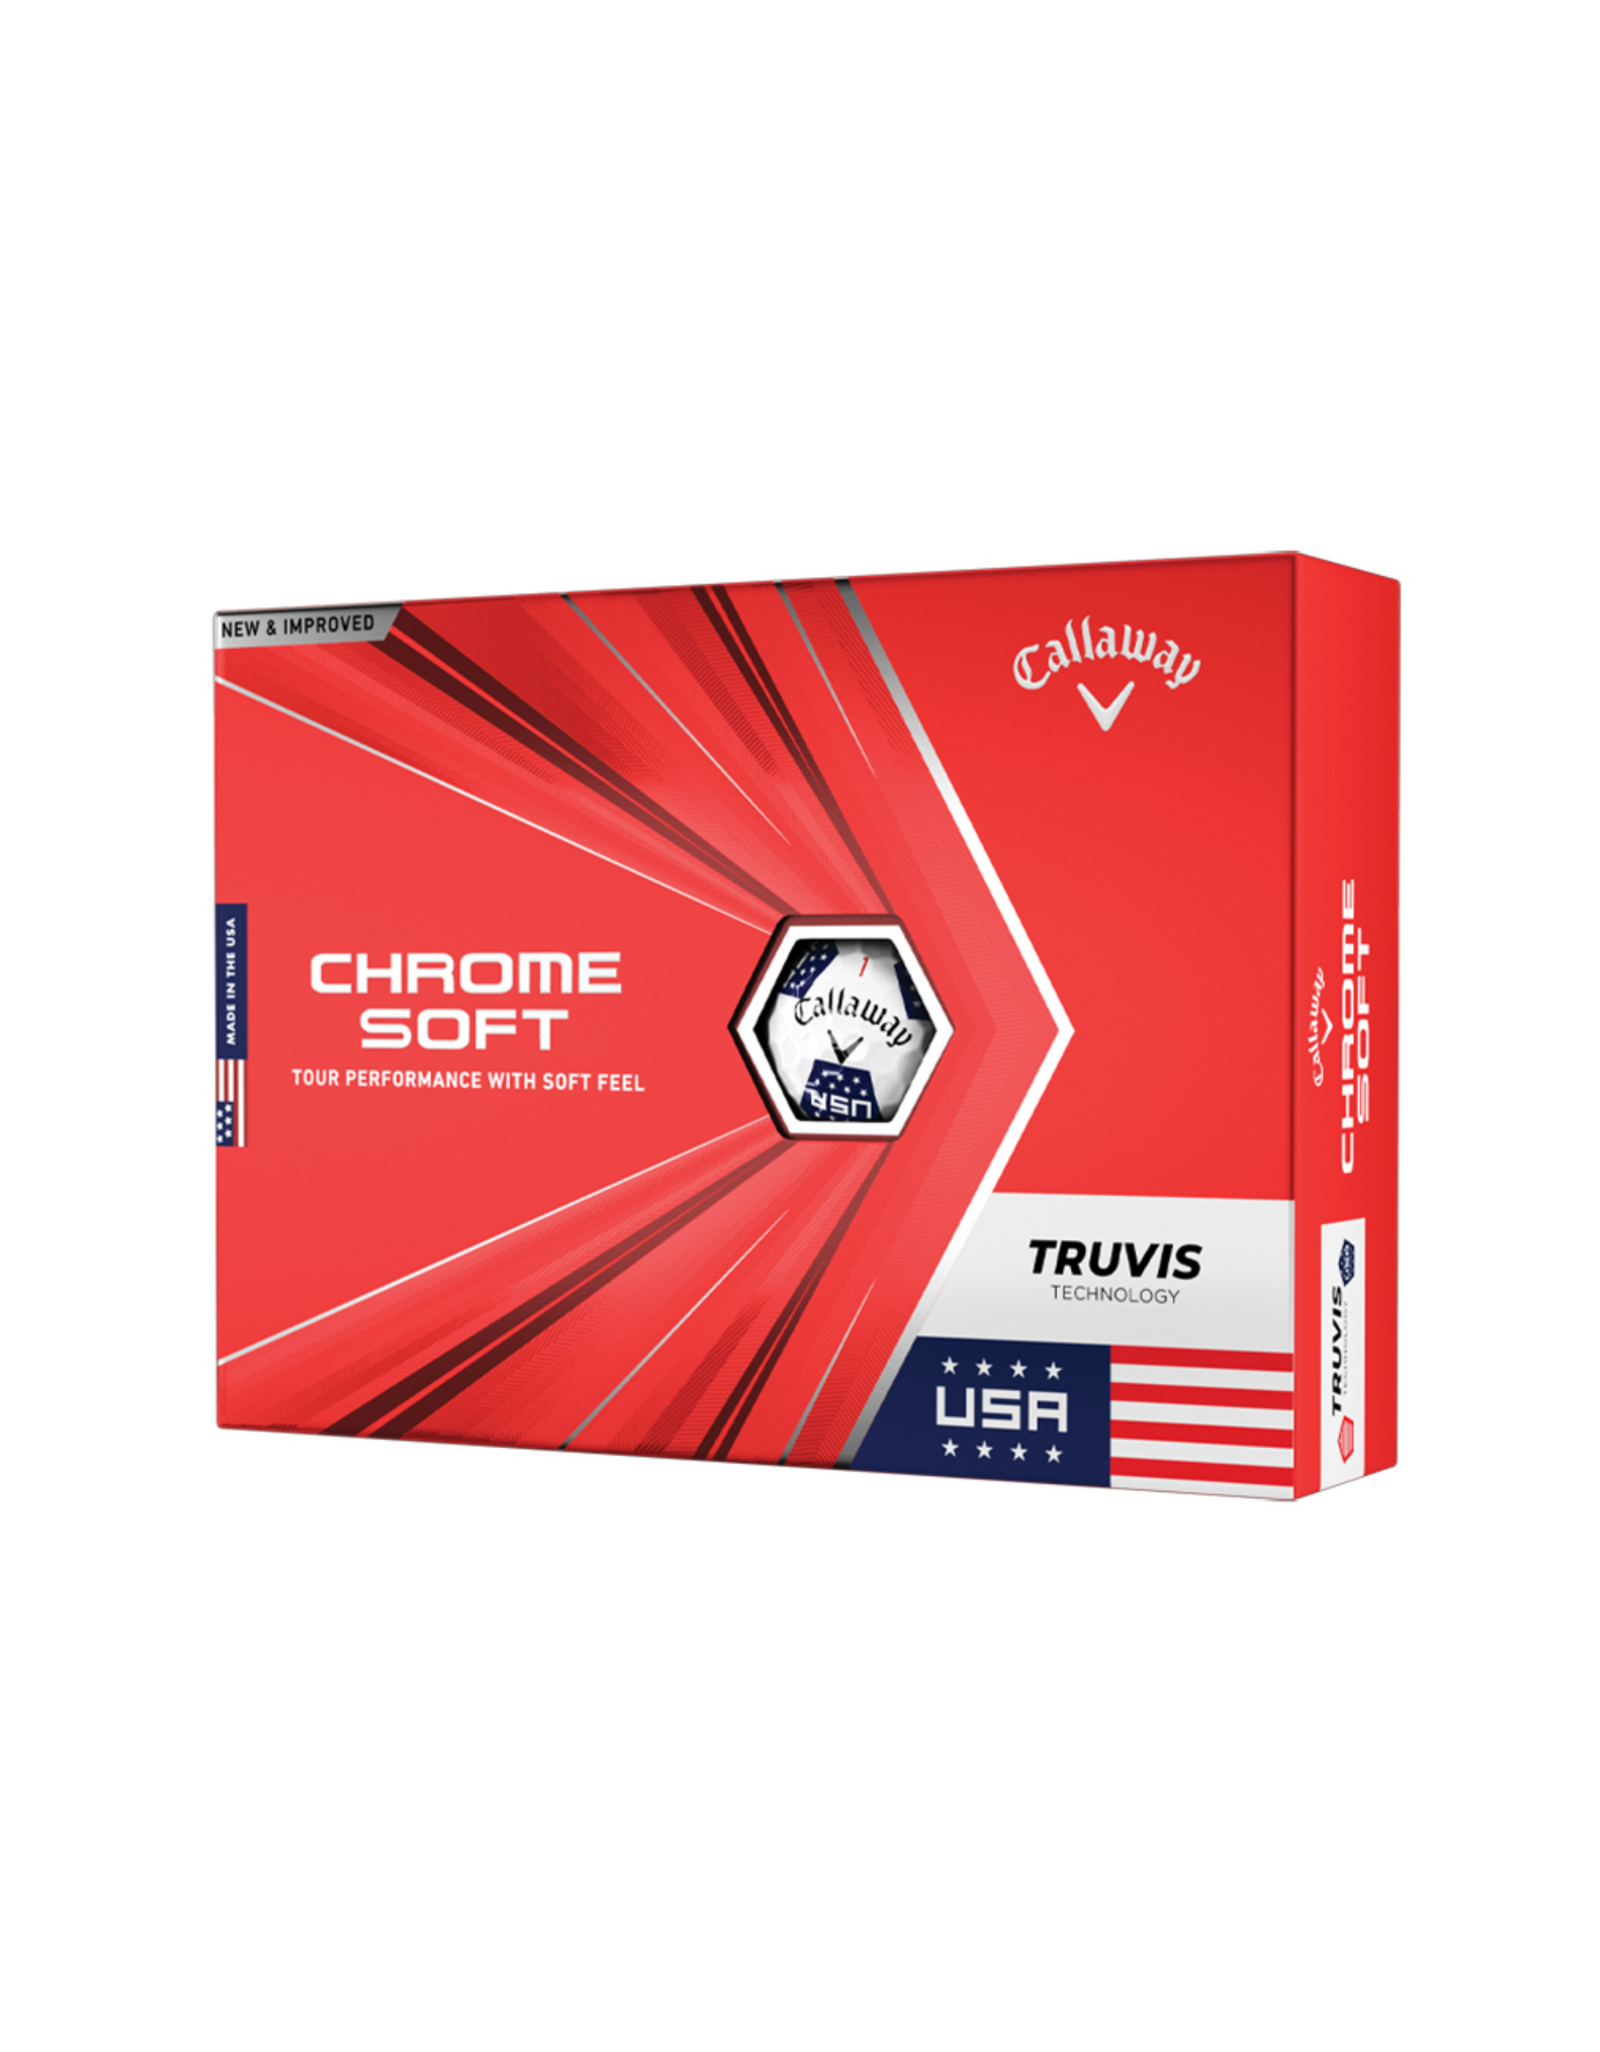 2020 Callaway Chrome Soft Golf Balls, Stars and Stripes Truvis (Limited Edition)